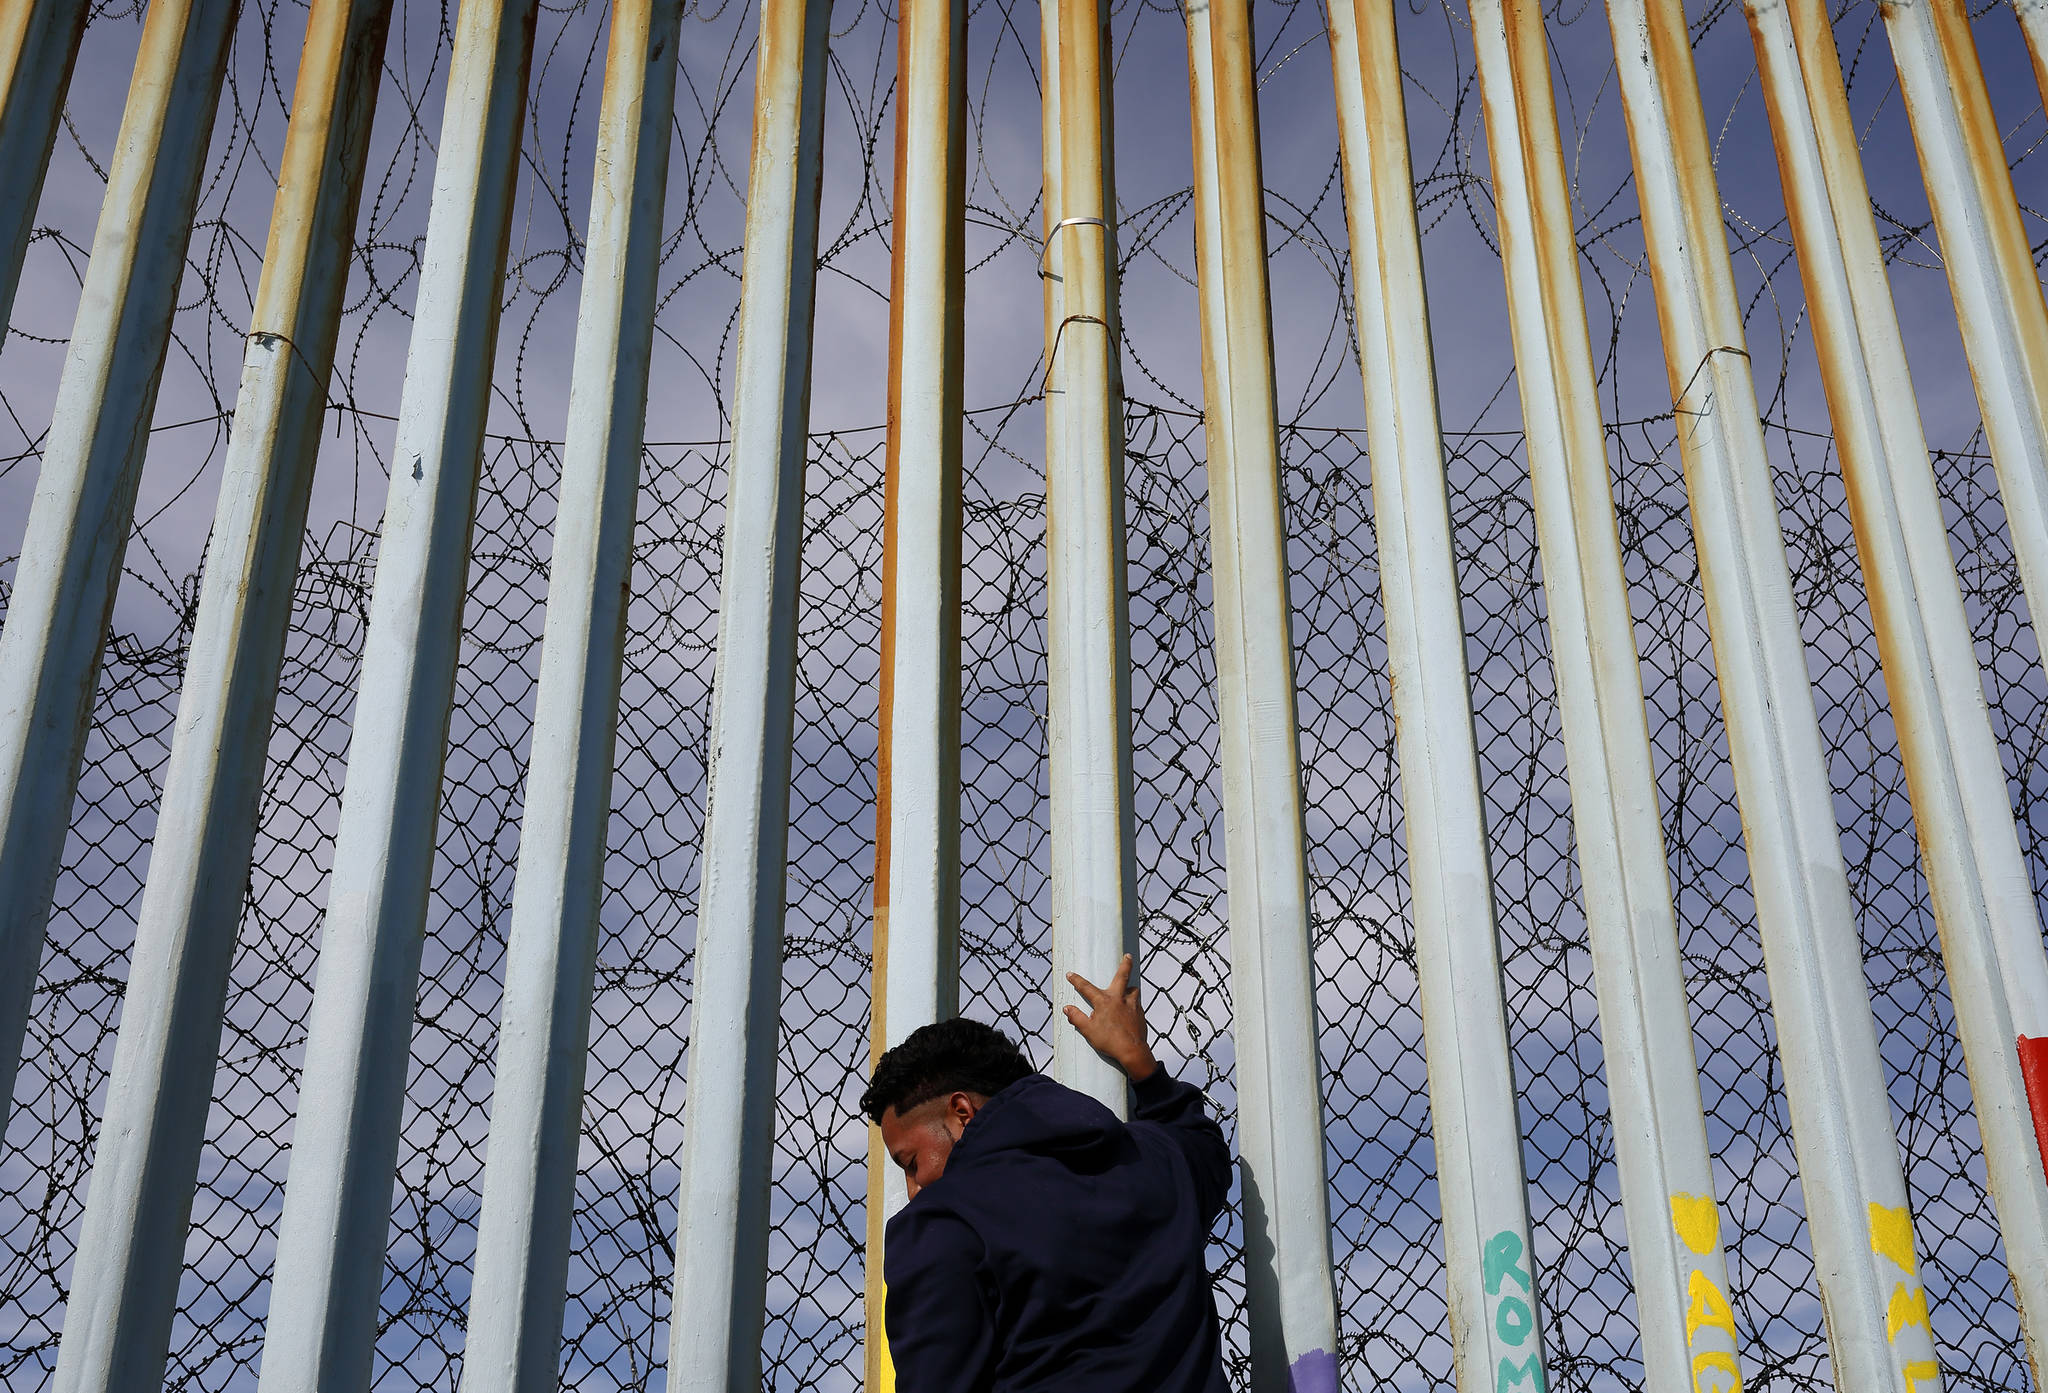 In this Jan. 8, 2019 photo, a man holds on to the border wall along the beach, in Tijuana, Mexico. The migrant caravan that was seized upon by U.S. President Donald Trump in the run-up to the 2018 election has quietly dwindled to a few hundred people, with many of them having crossed into the U.S. or put down roots in Mexico. (Gregory Bull | Associated Press)